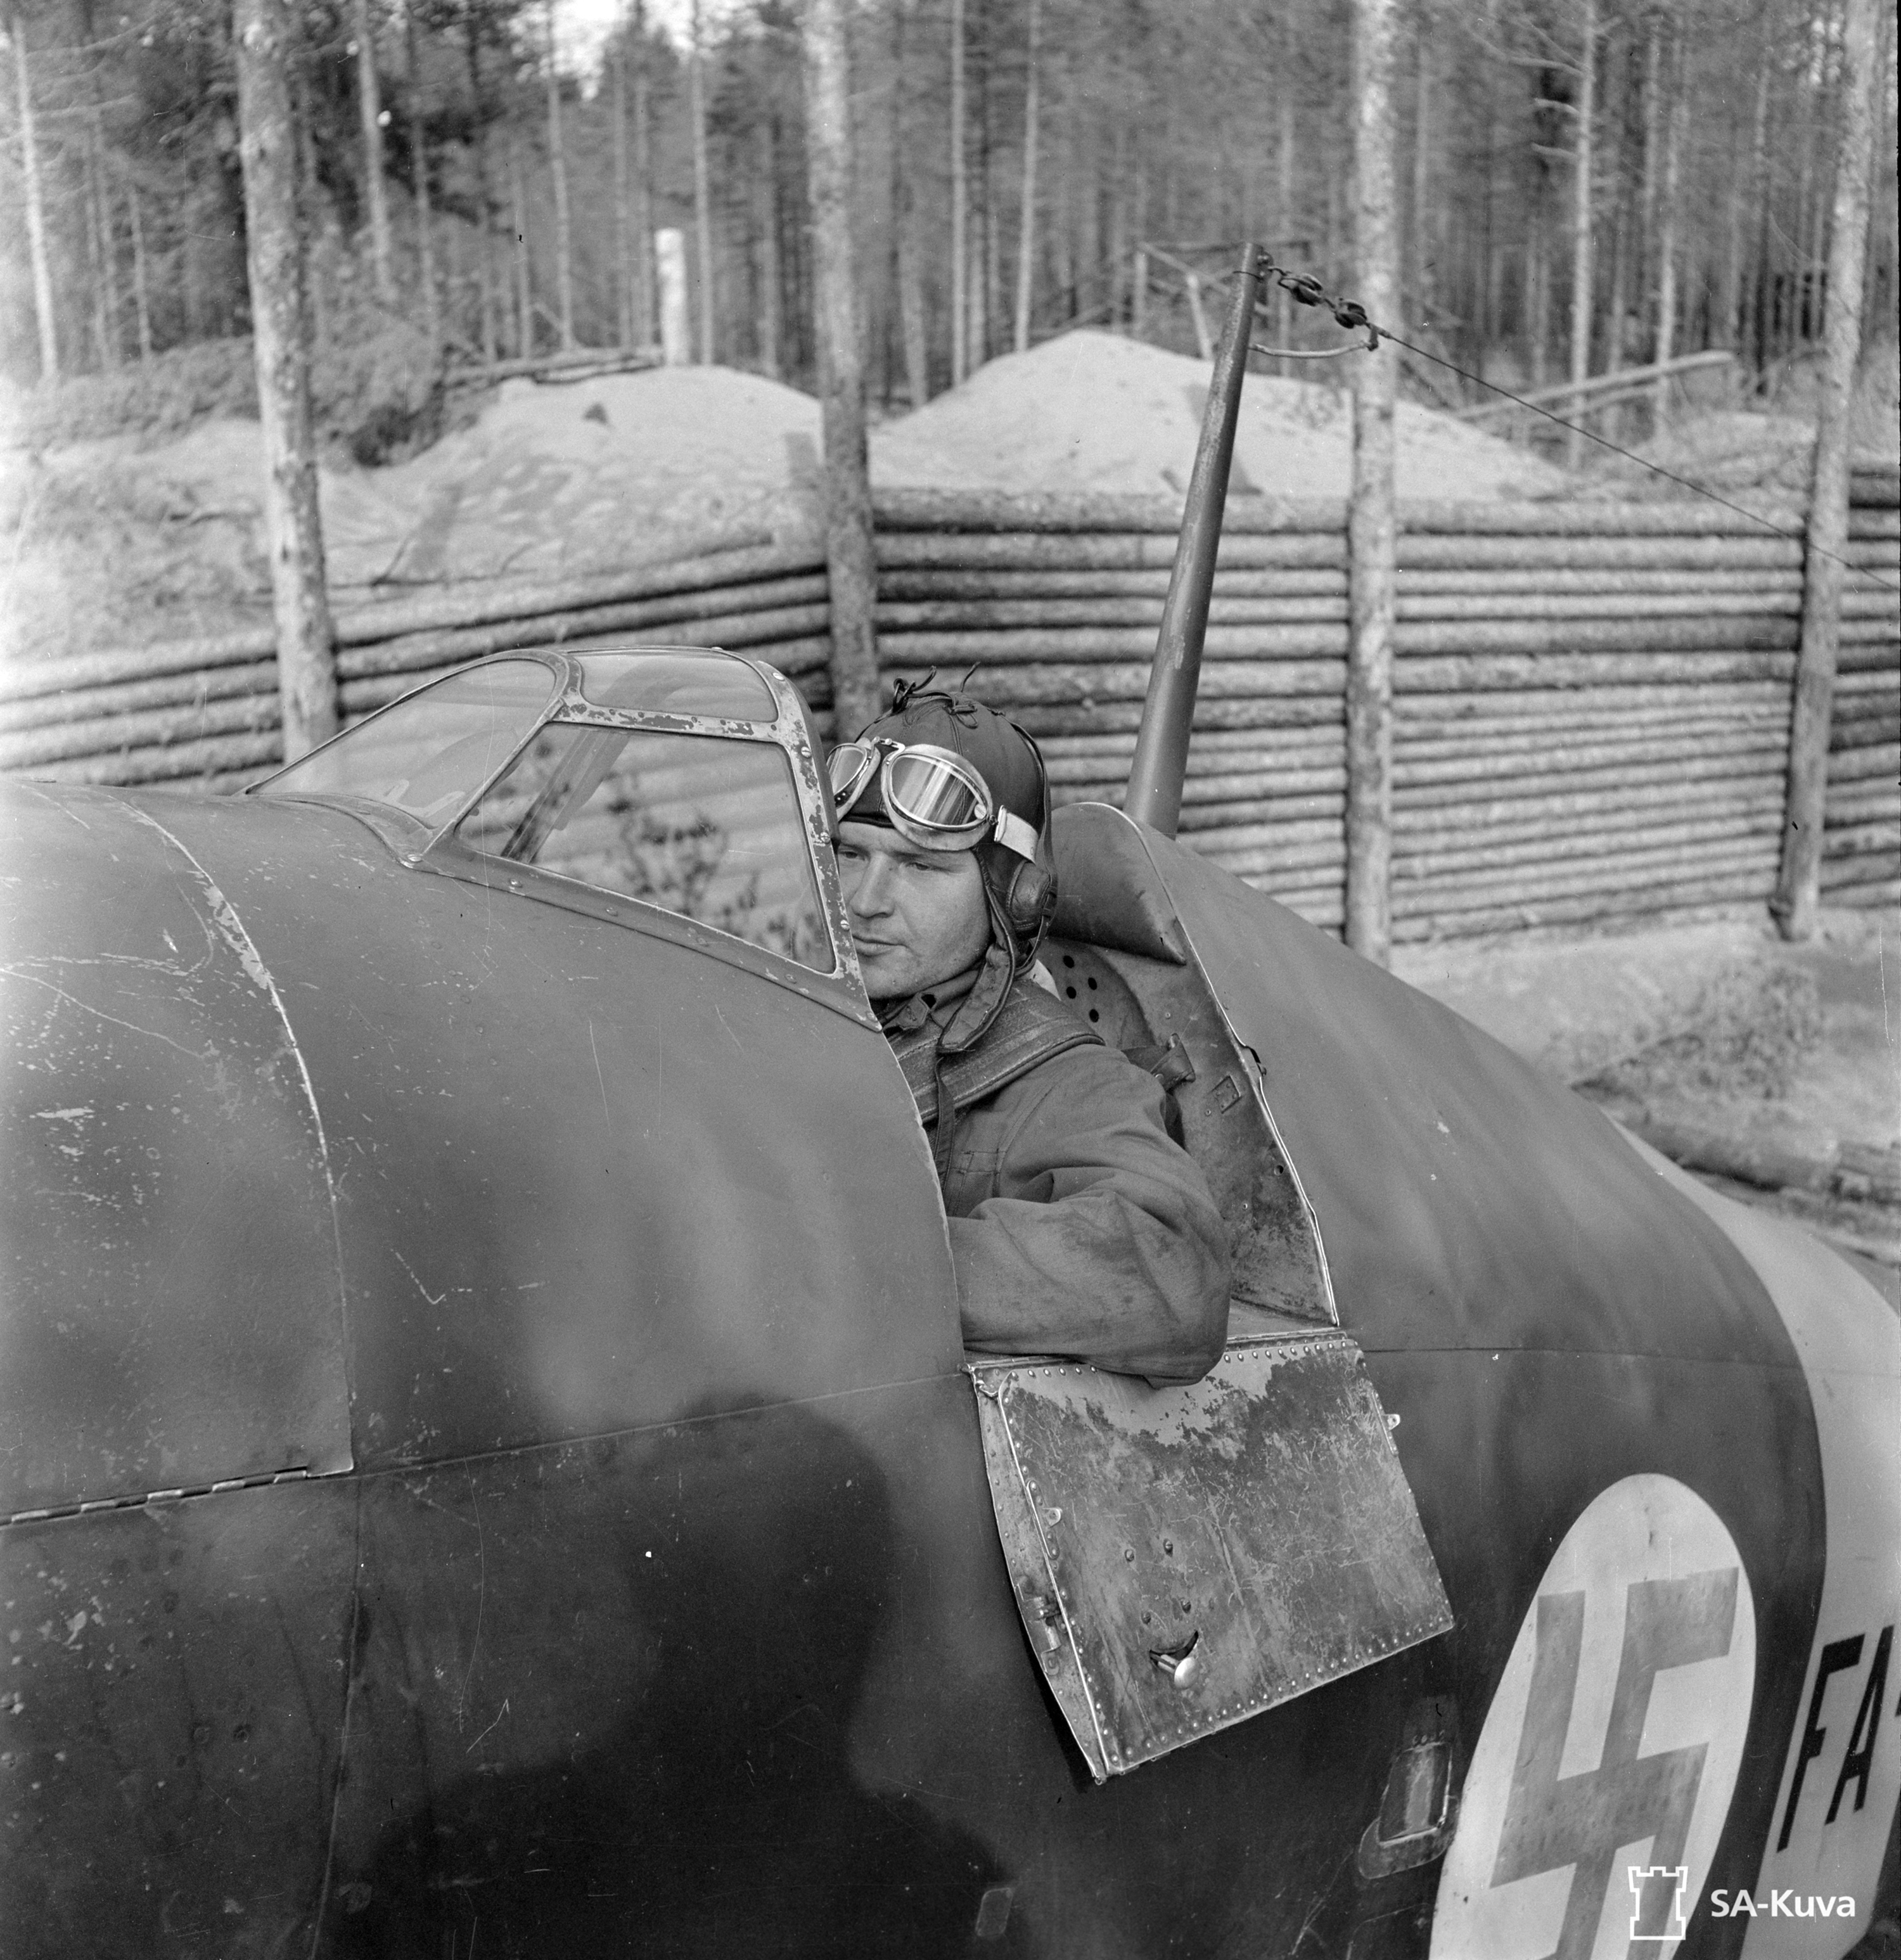 Aircrew FAF 3.LeLv26 pilot Onni Paronen sd a I 16 fighter over in this aircraft over Rautu 30th Aug 1942 106357